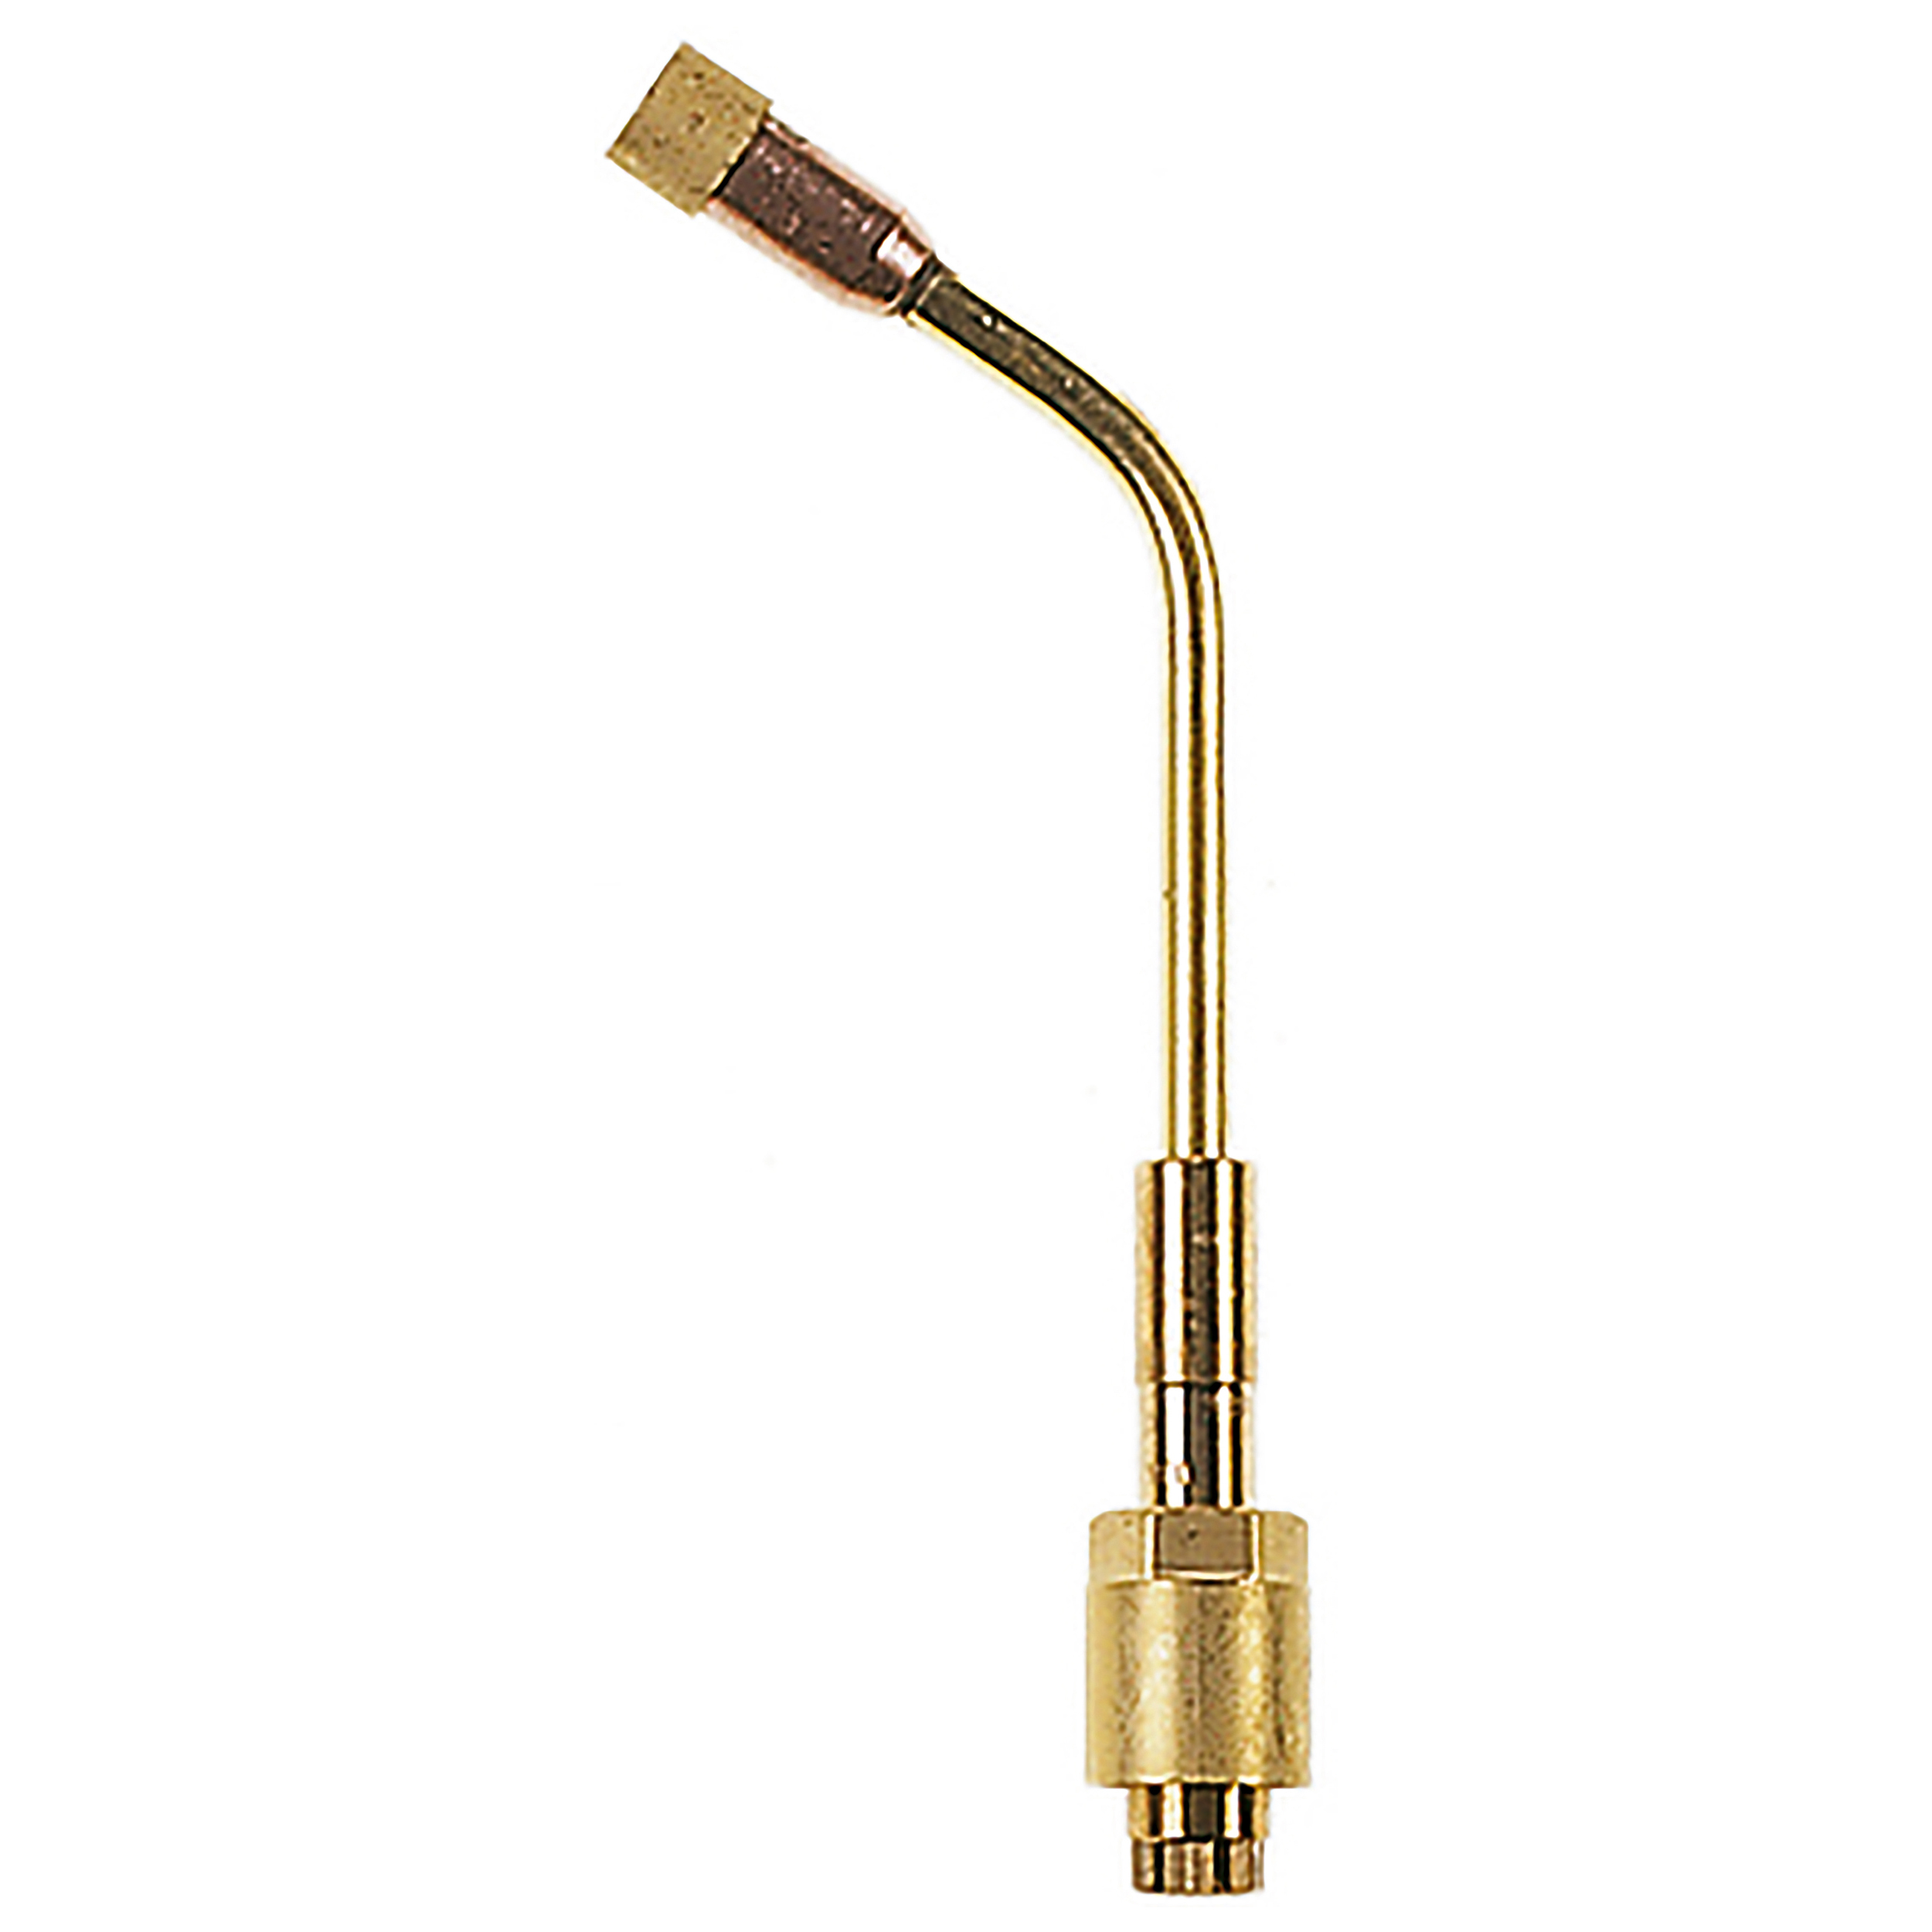 Multi-flame torch 17 mm, size 5 (6.0–9.0 mm), length: 265 mm, consumption: 800 l/h ± 0 %, acetylene – oxygen, with sleeve nut